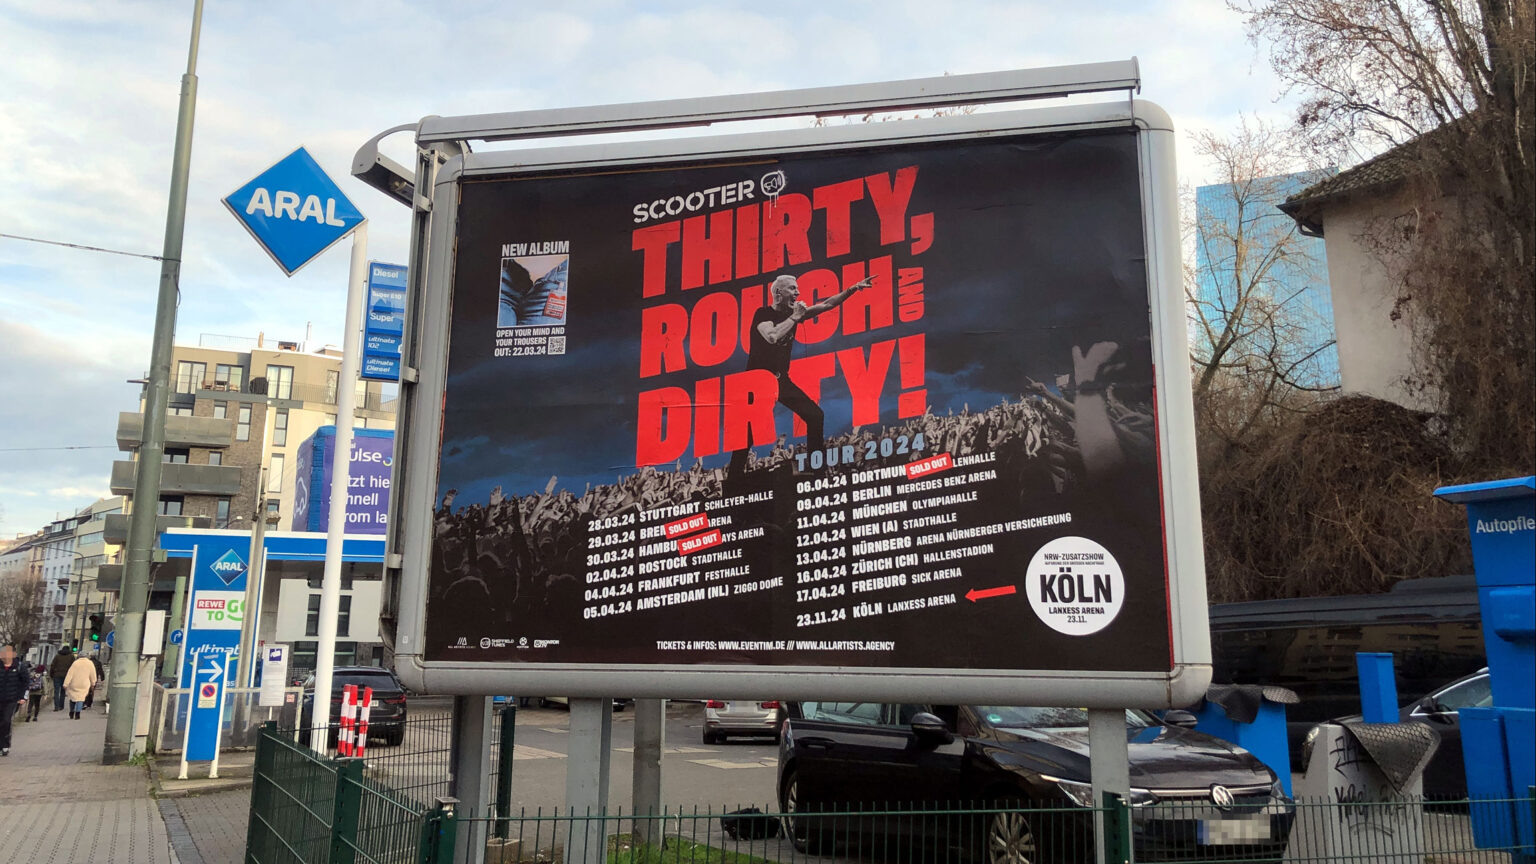 Scooter - Thirty, Rough and Dirty! Plakat an der Aral Tankstelle in Frankfurt am Main.